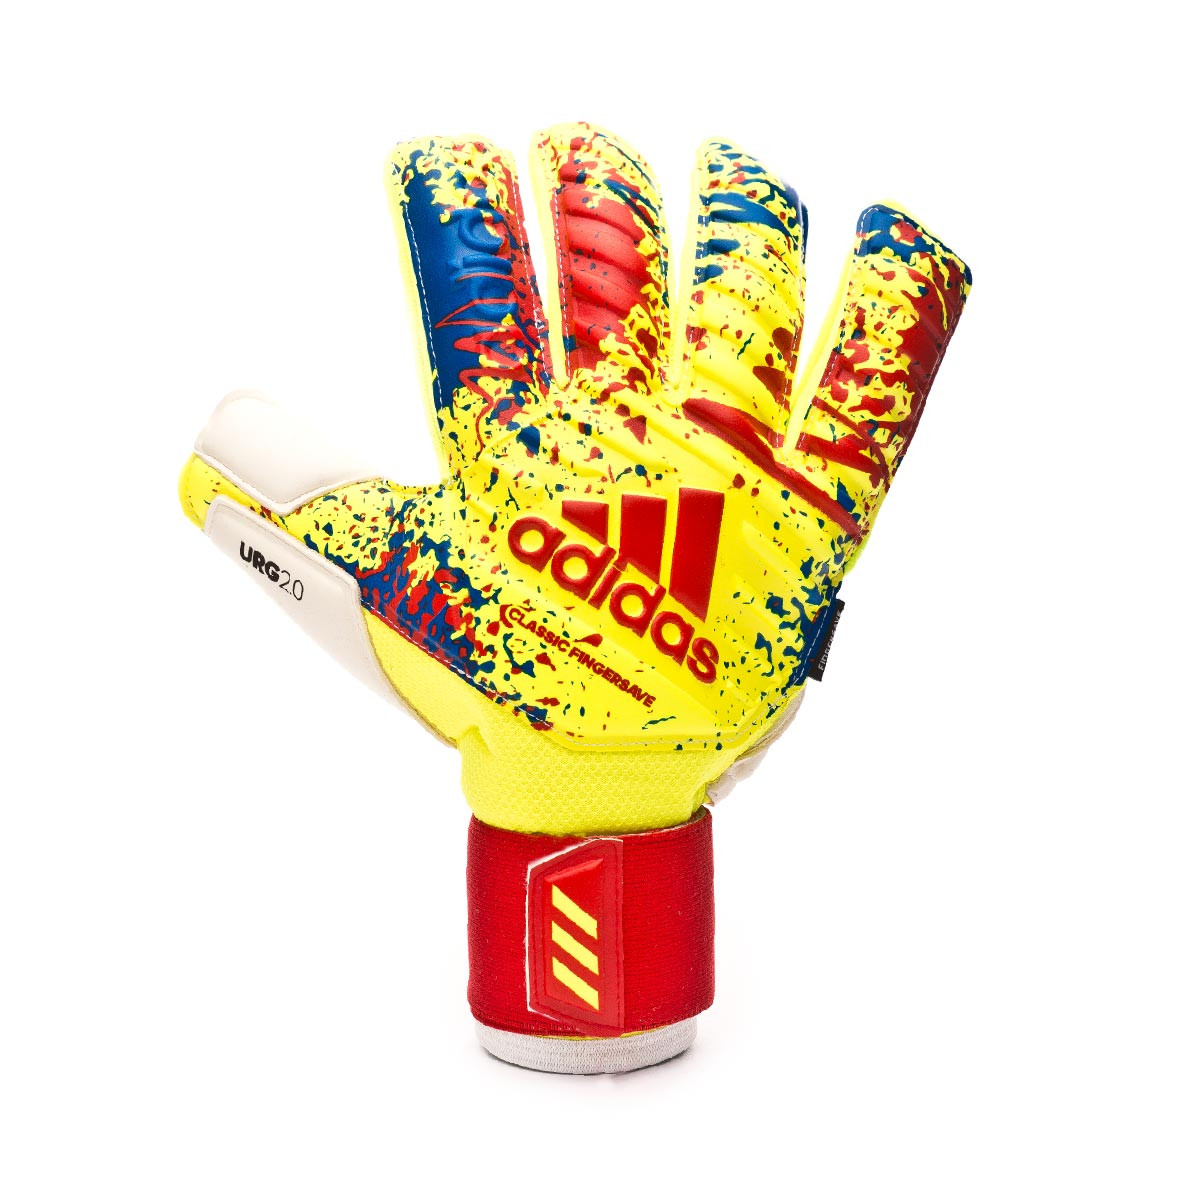 Glove adidas Classic Pro FingerSave Solar yellow-Active red-Football blue -  Football store Fútbol Emotion